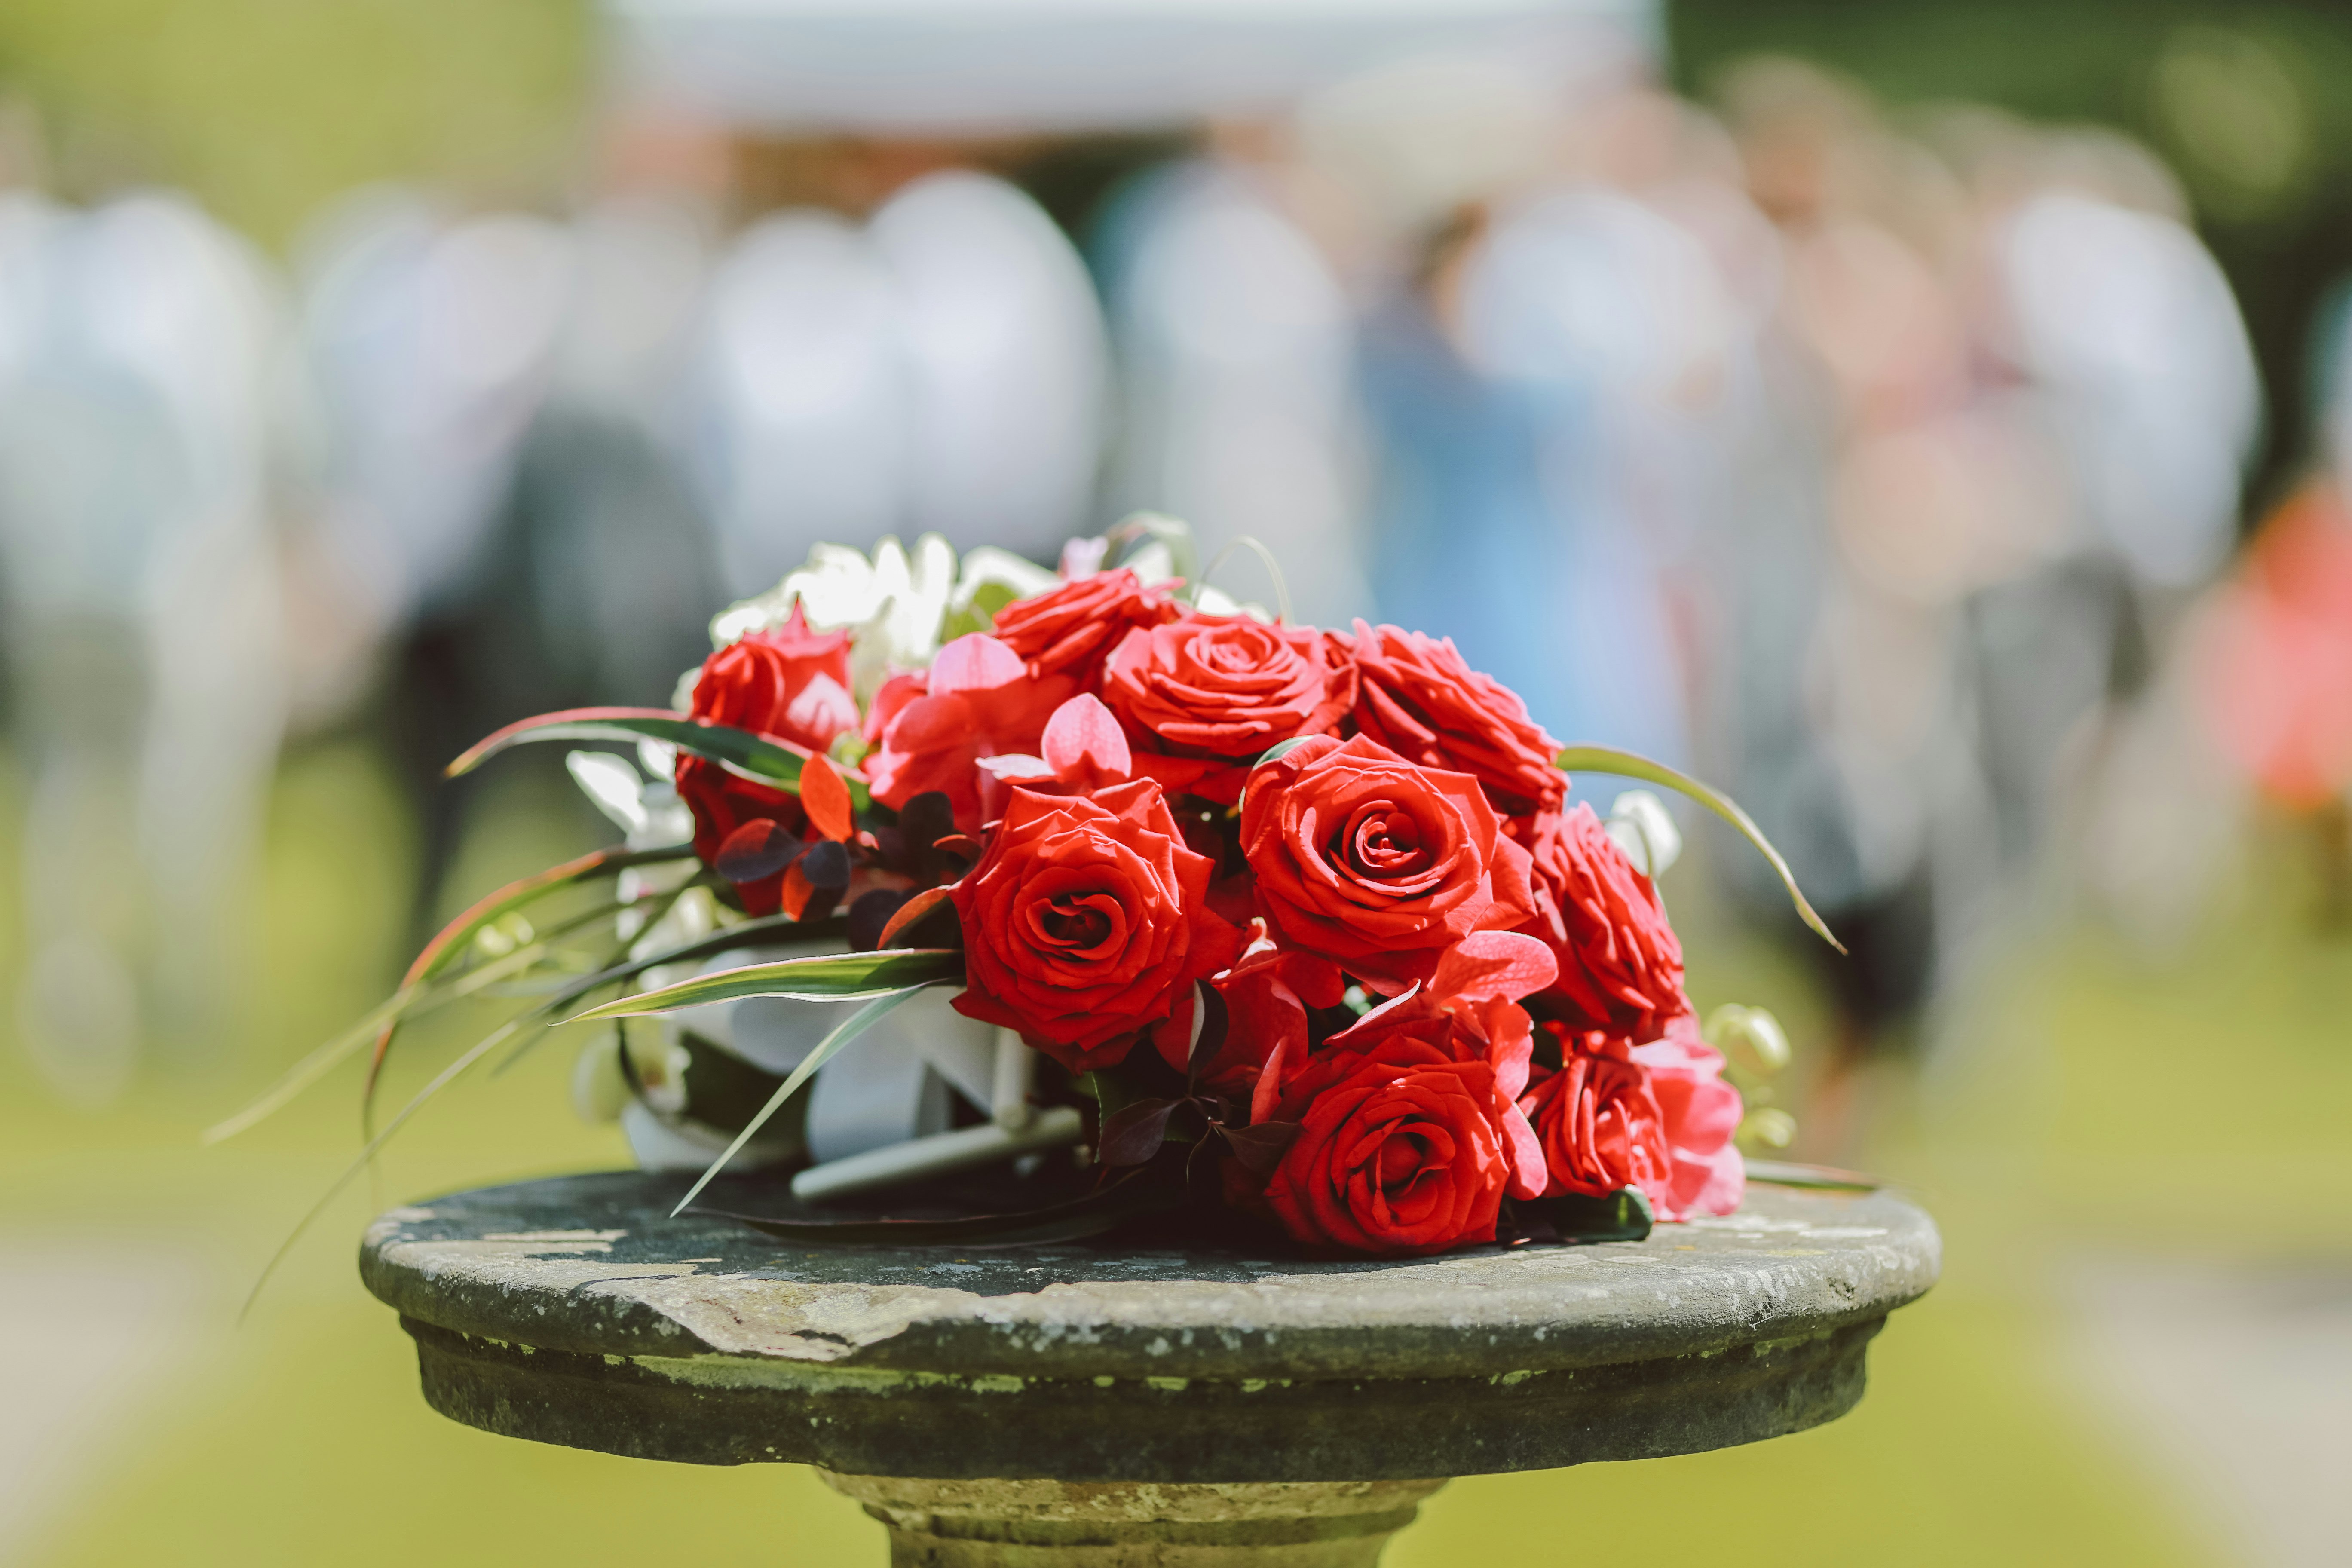 Roses laid with wedding ceremony in background